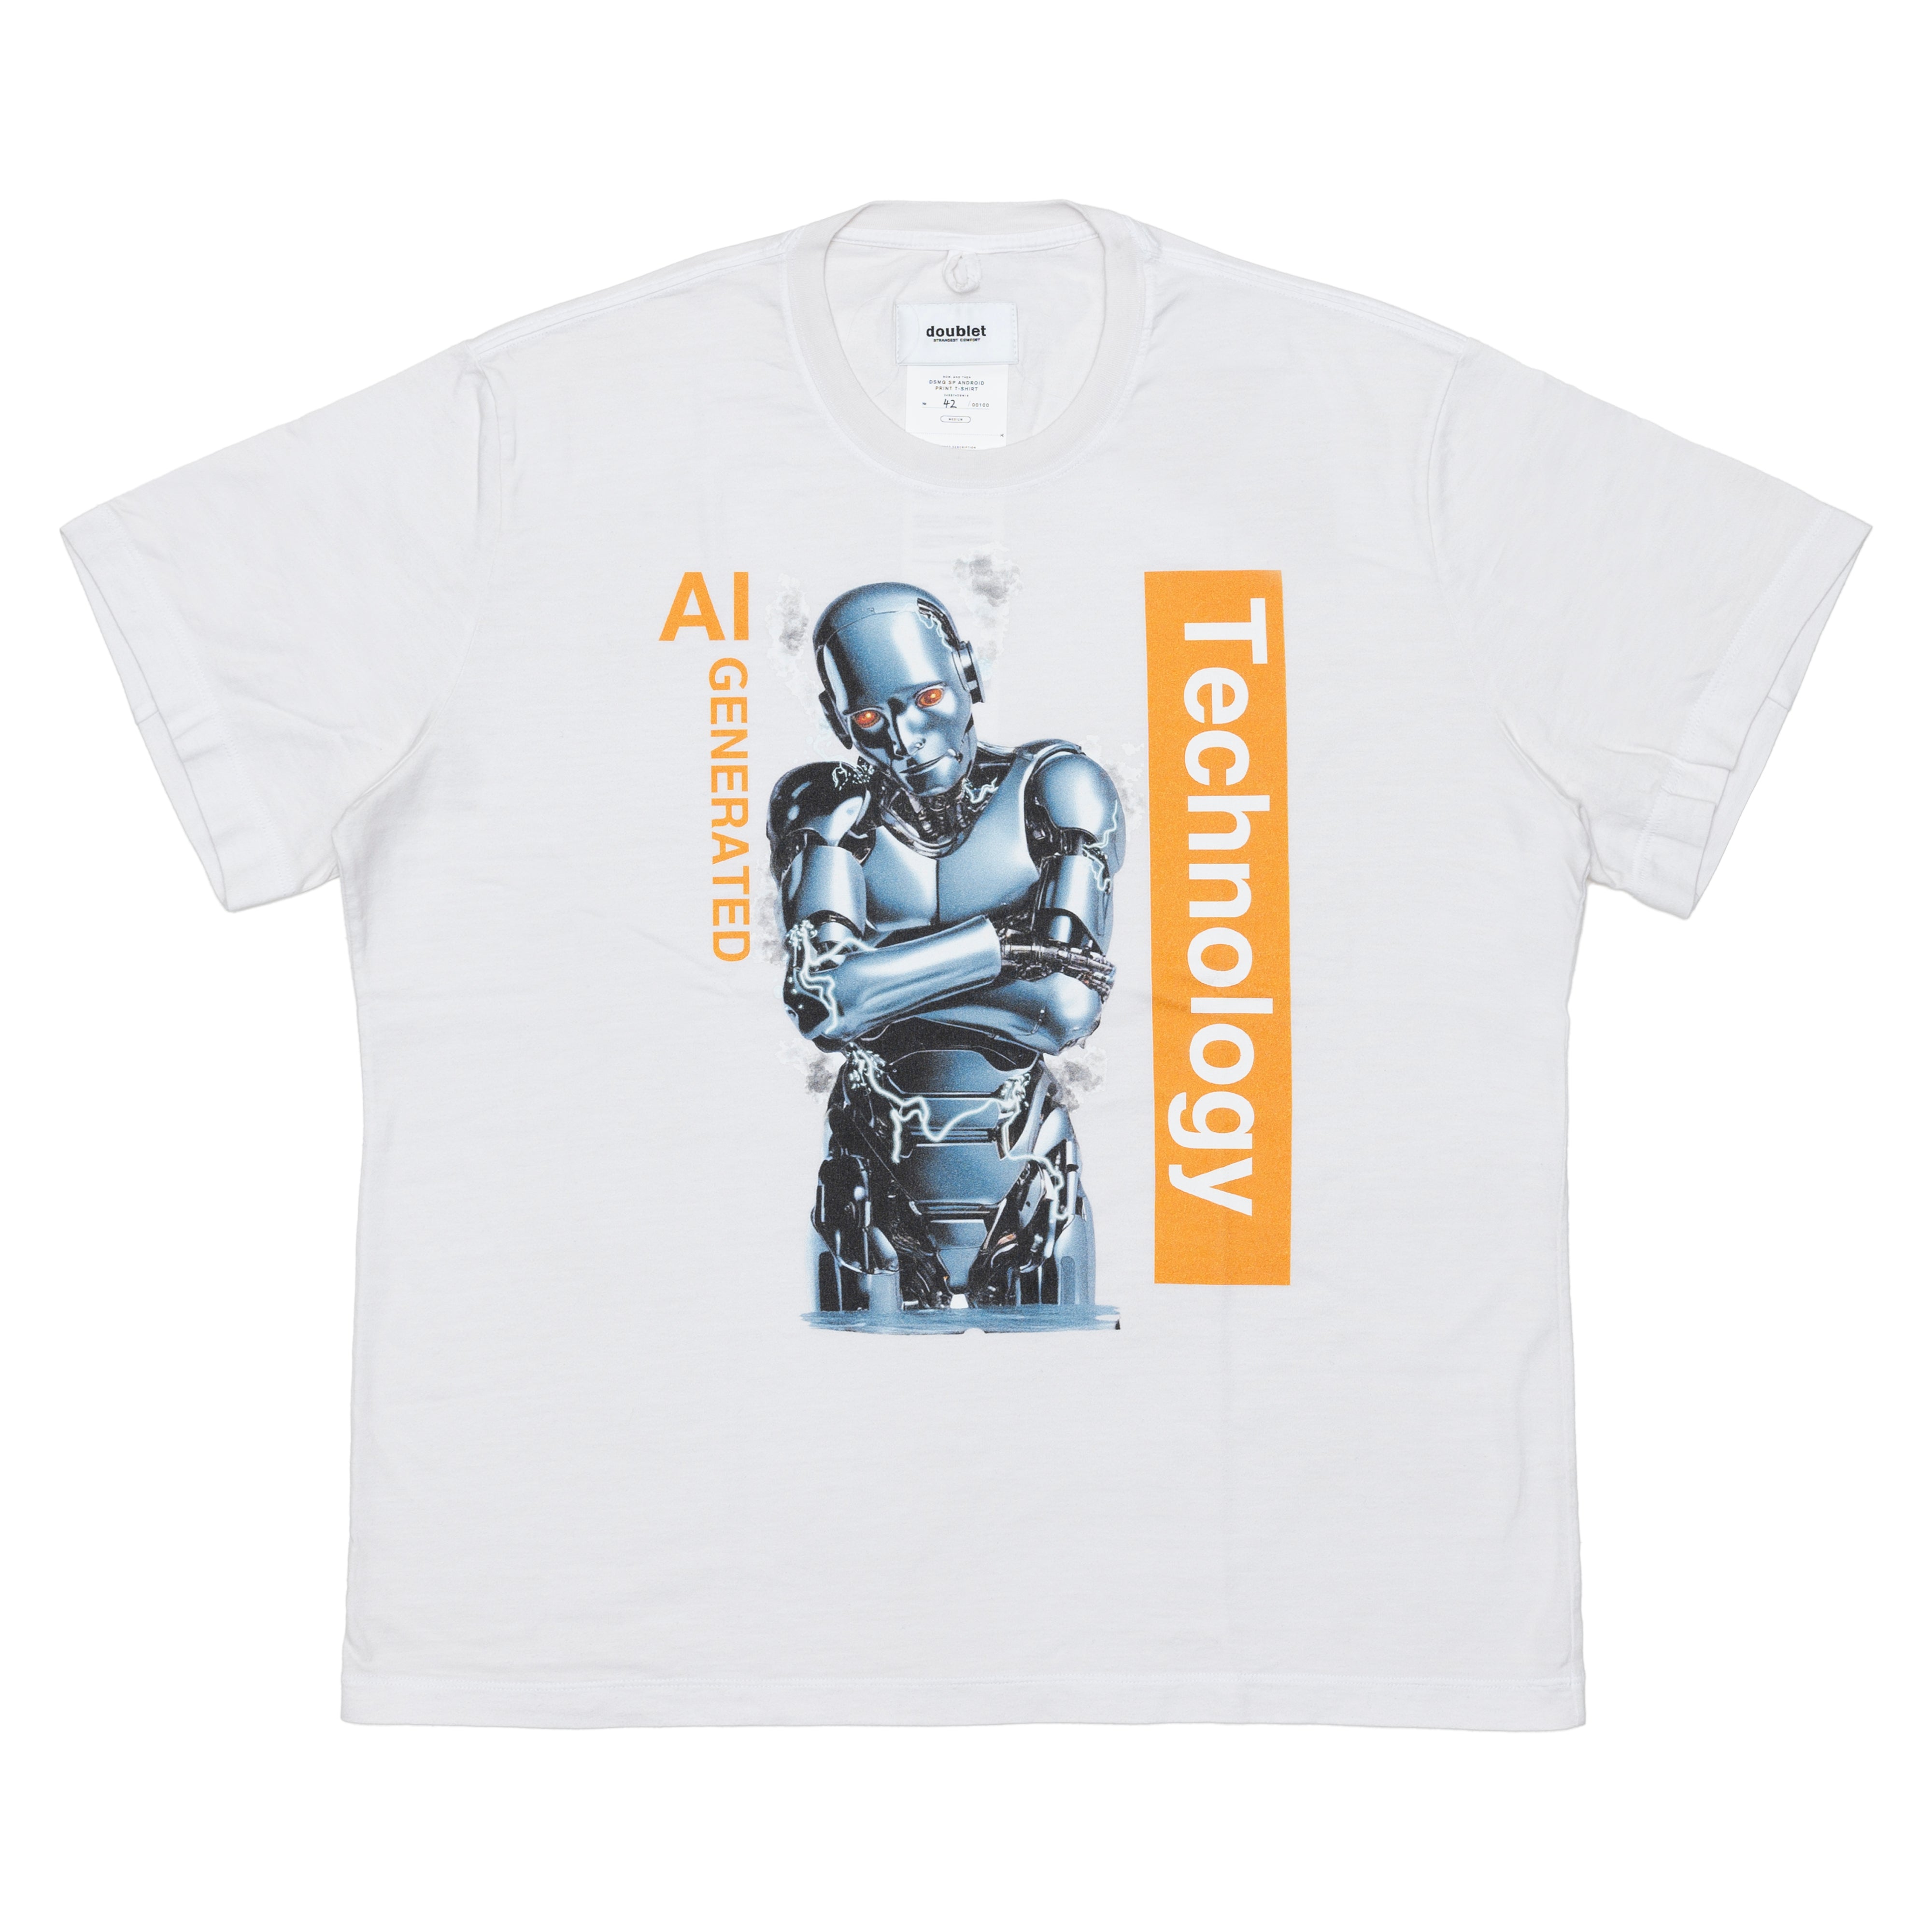 DOUBLET - Dsm Sp Android Print Tee - (Techno)